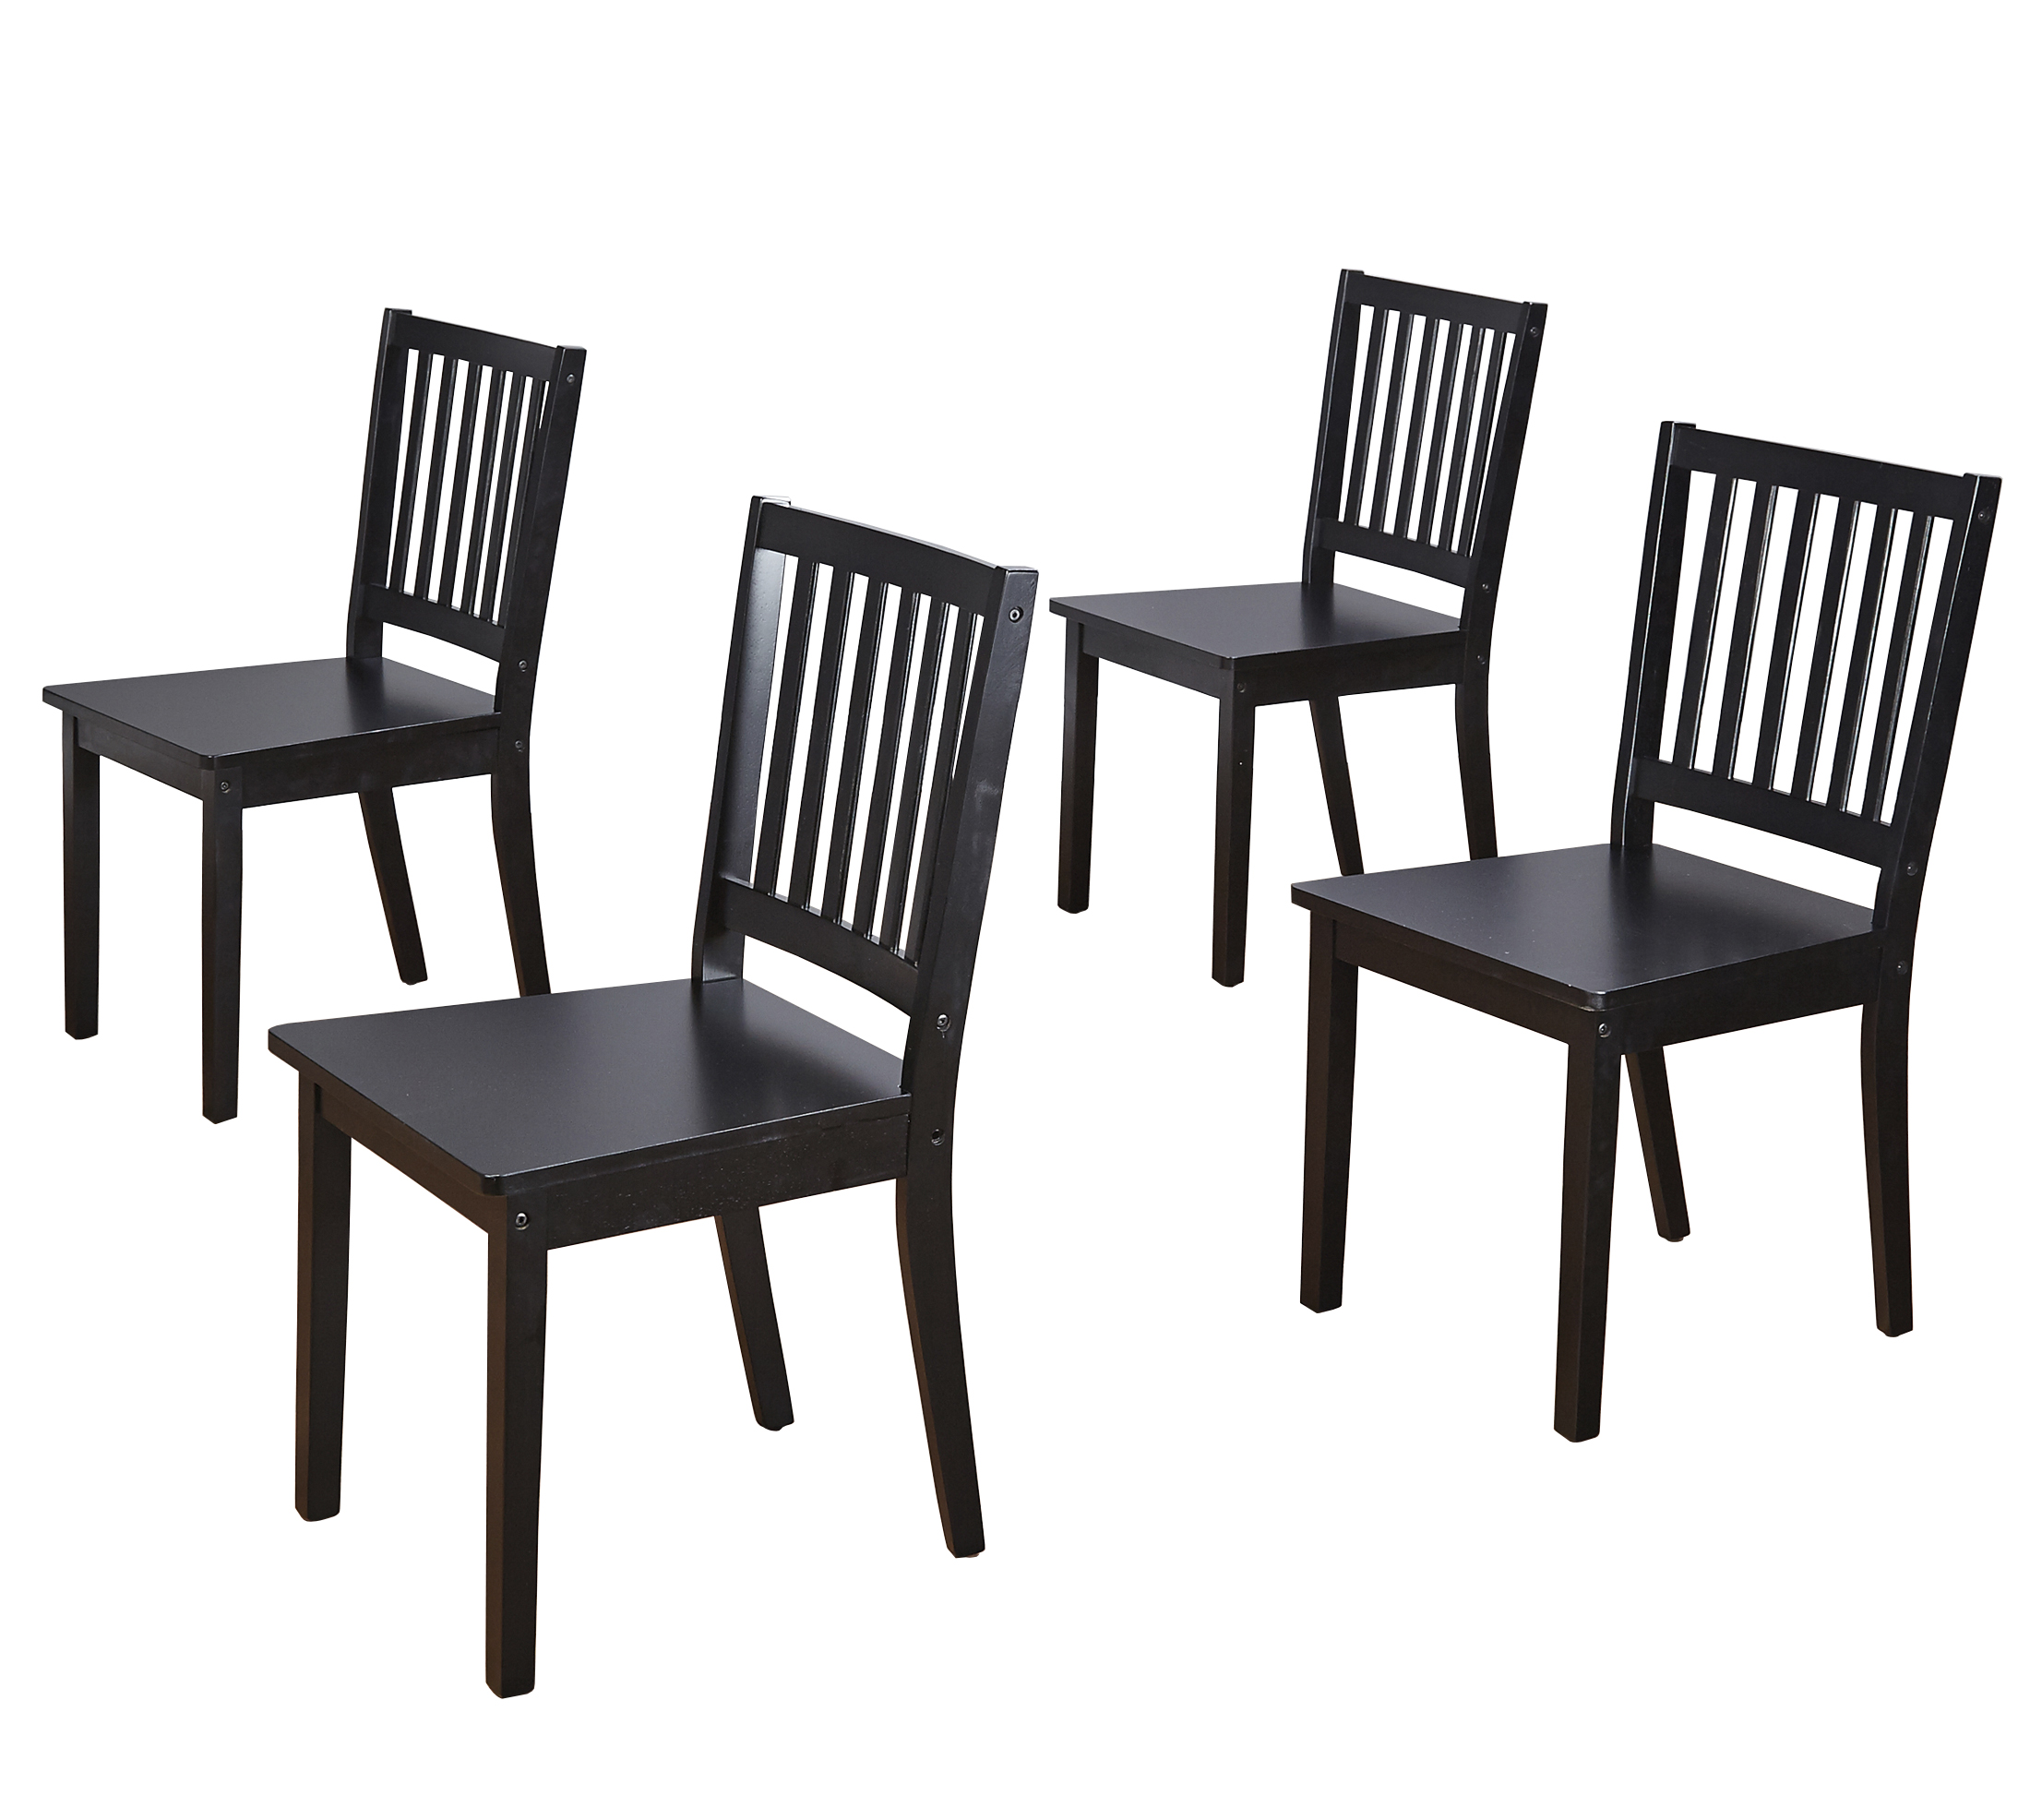 TMS Shaker Dining Indoor Wood Chair, Set of 4, Black - image 1 of 7